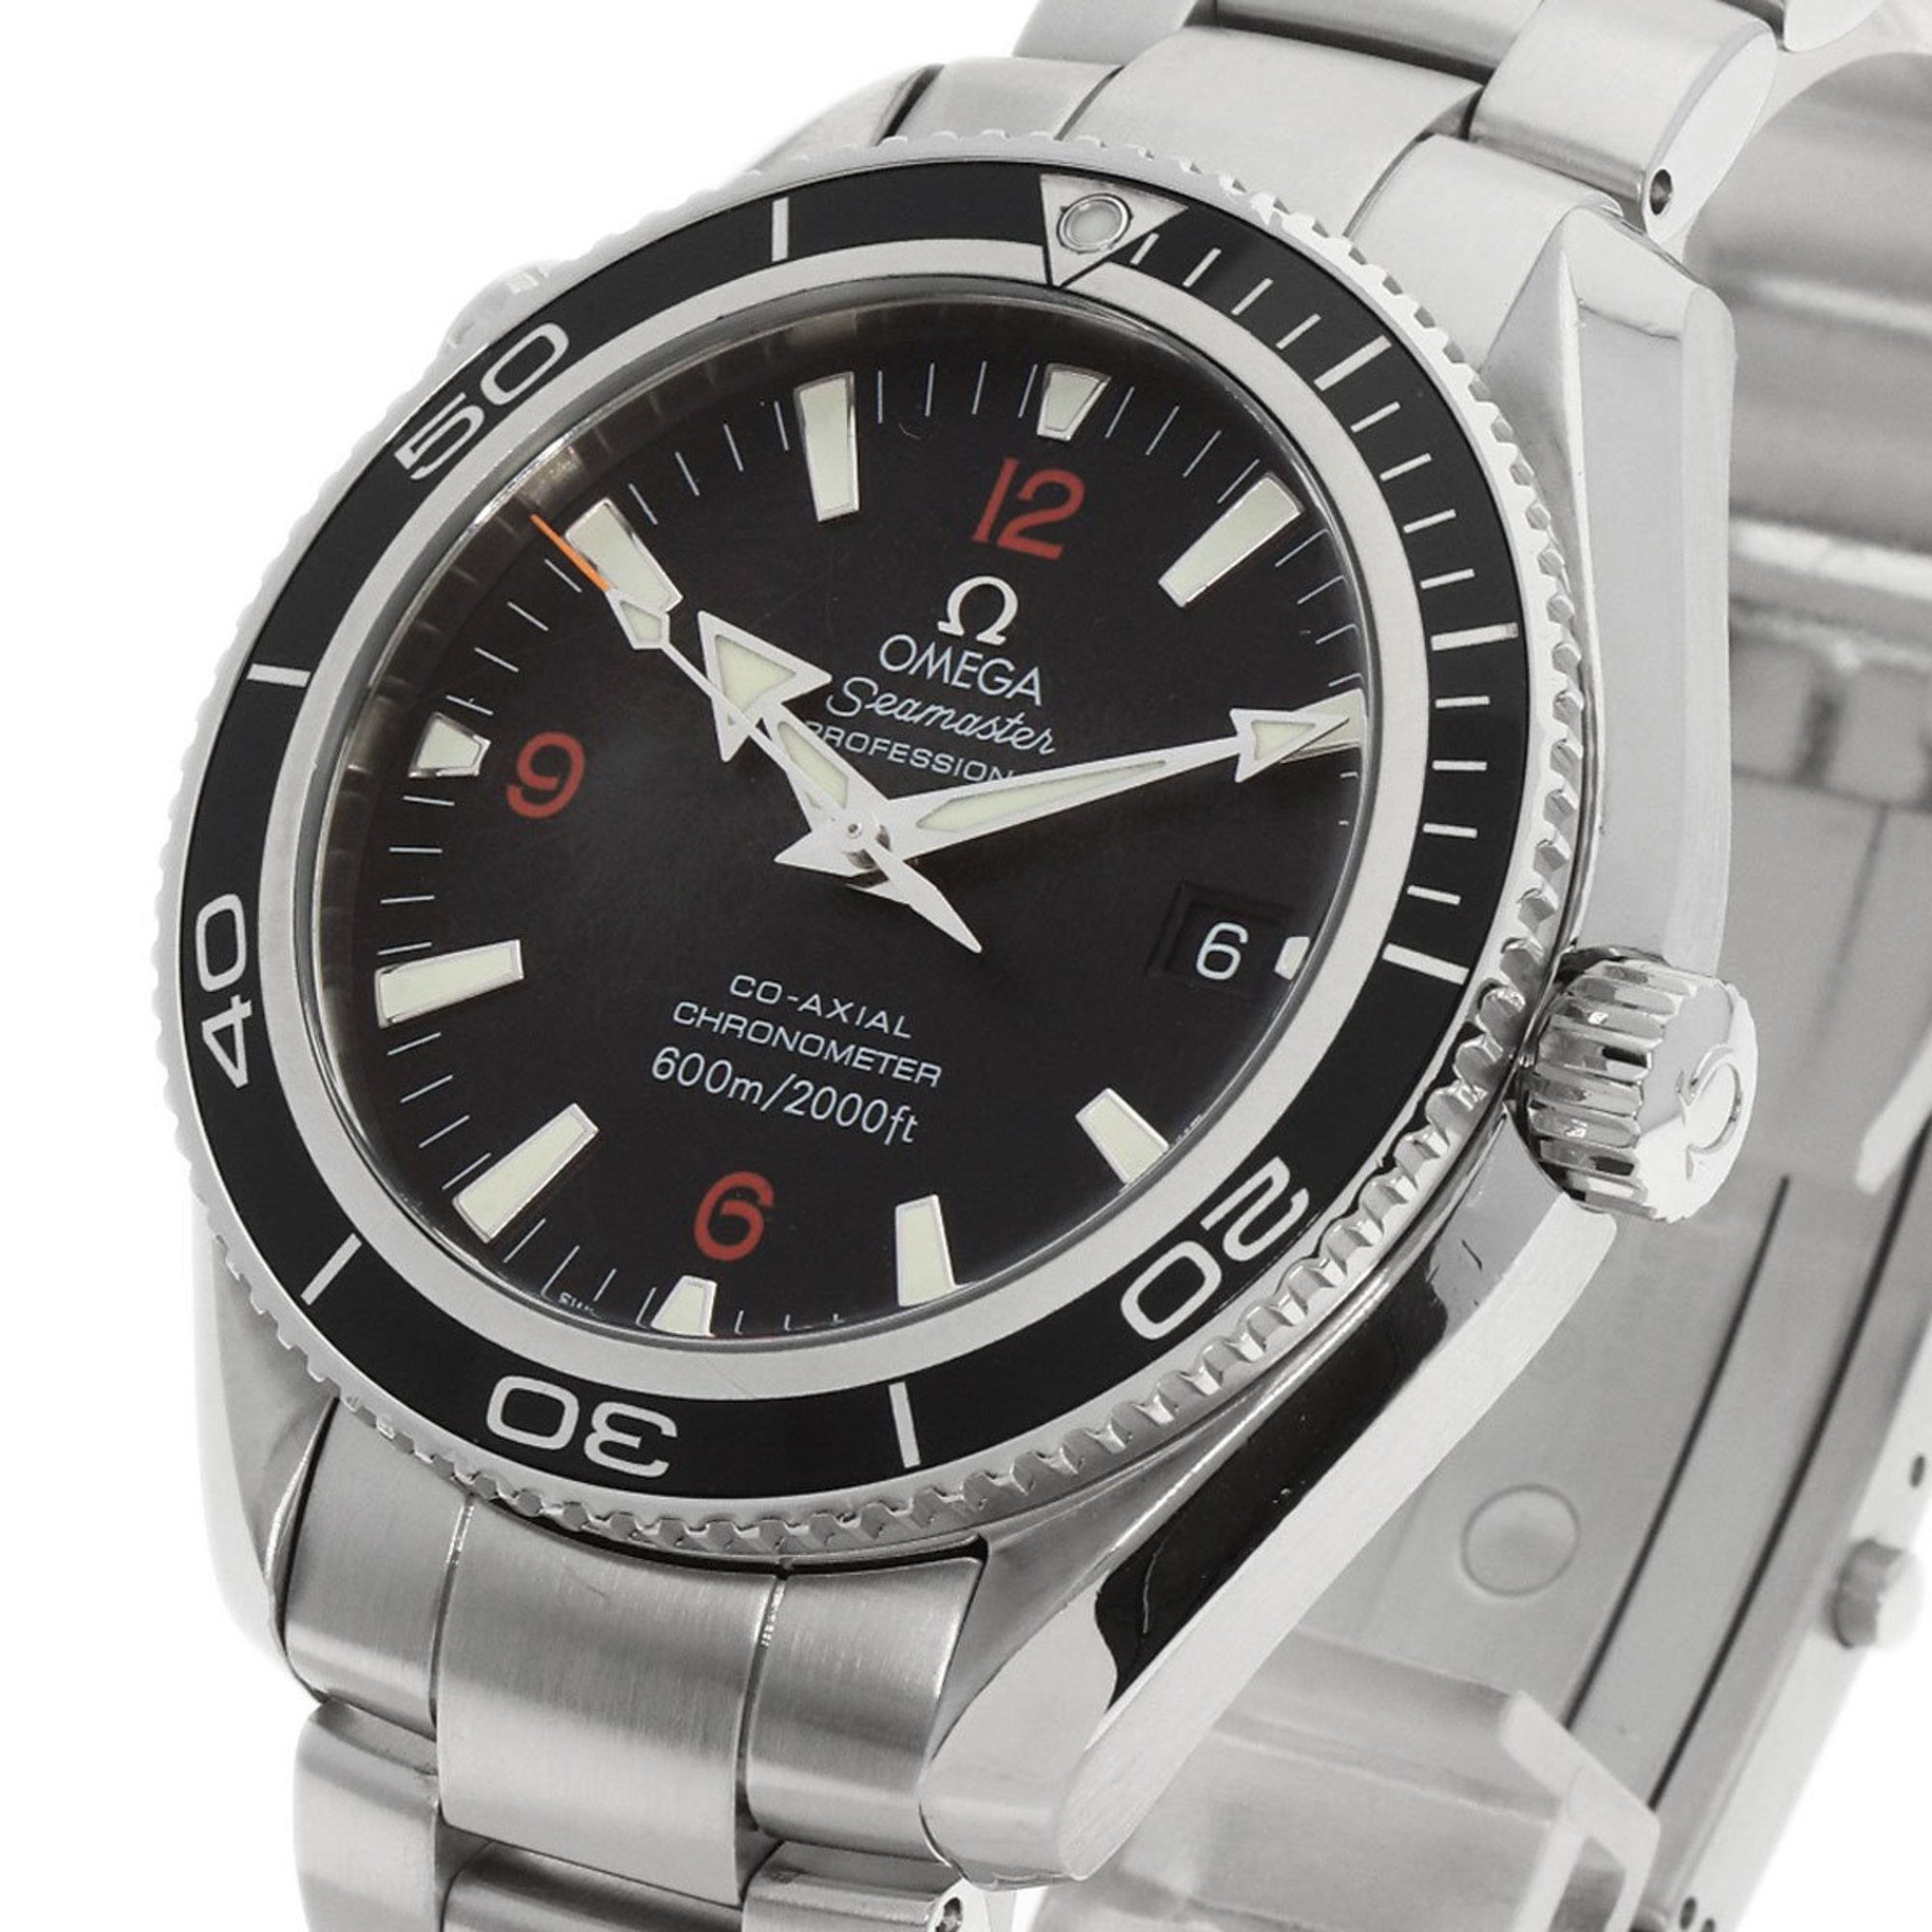 Omega 2201.51 Seamaster Planet Ocean Co-Axial Watch Stainless Steel/SS Men's OMEGA